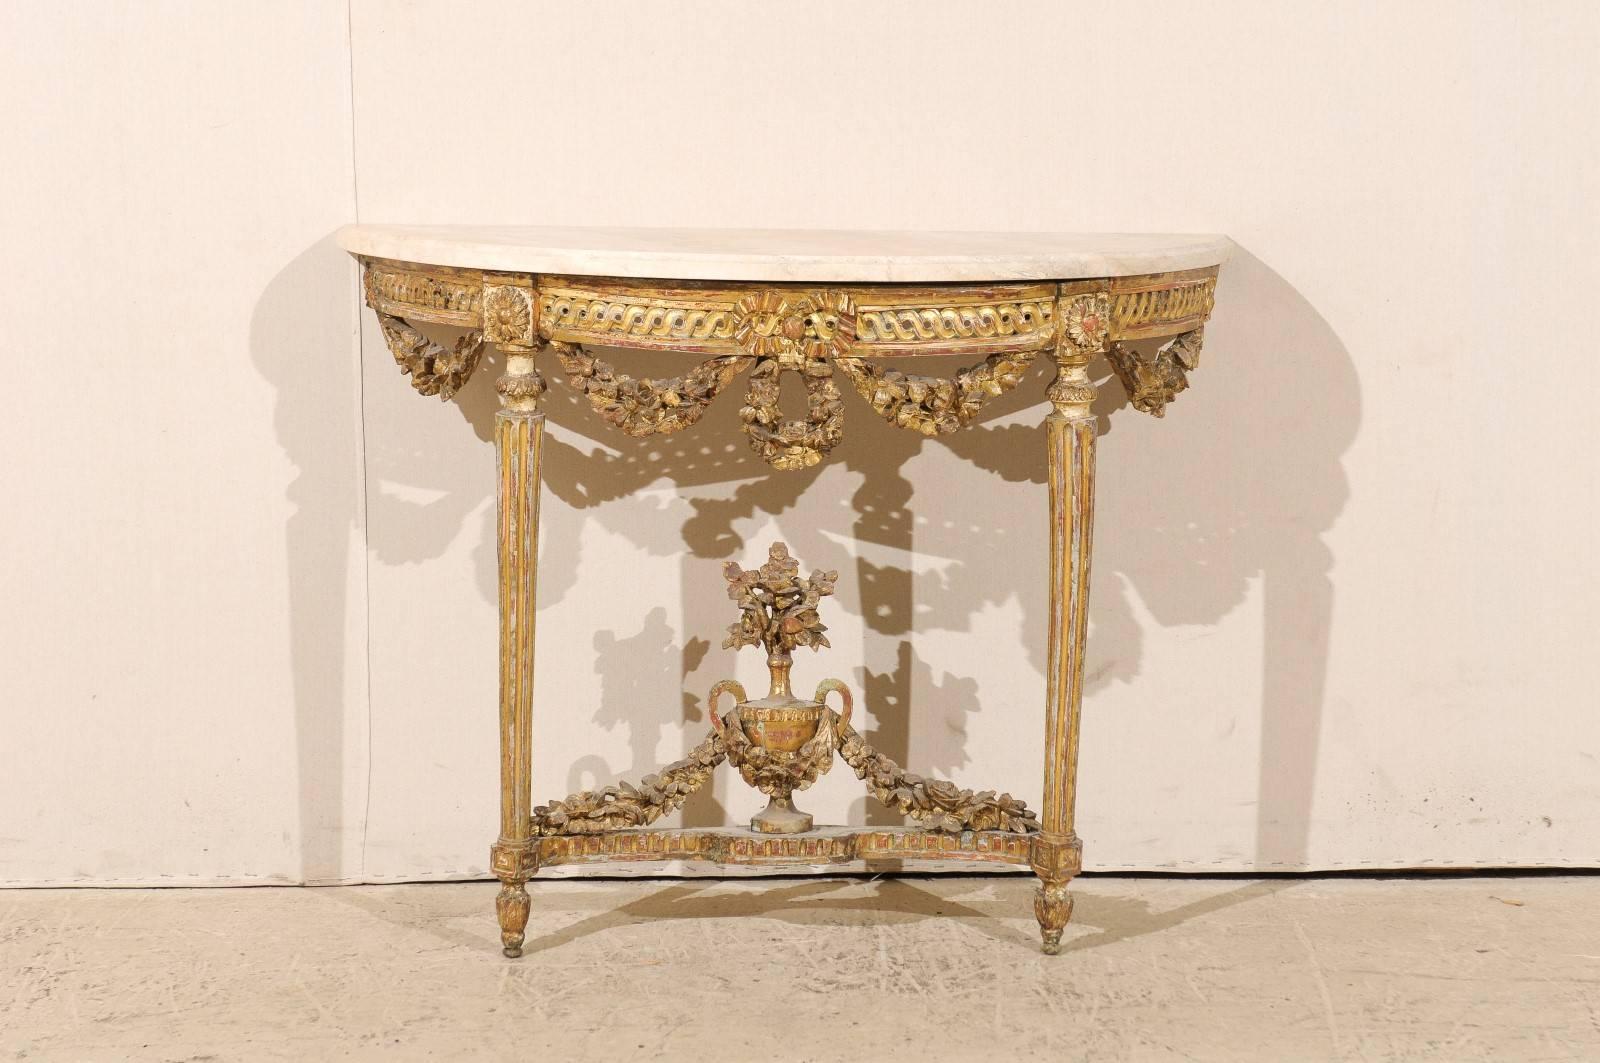 An Italian early 19th century marble-top console table. This beautiful giltwood console table with white marble top features a nicely carved apron with hanging floral swags and guilloche motif. The two legs, topped with floral accents, are tapered